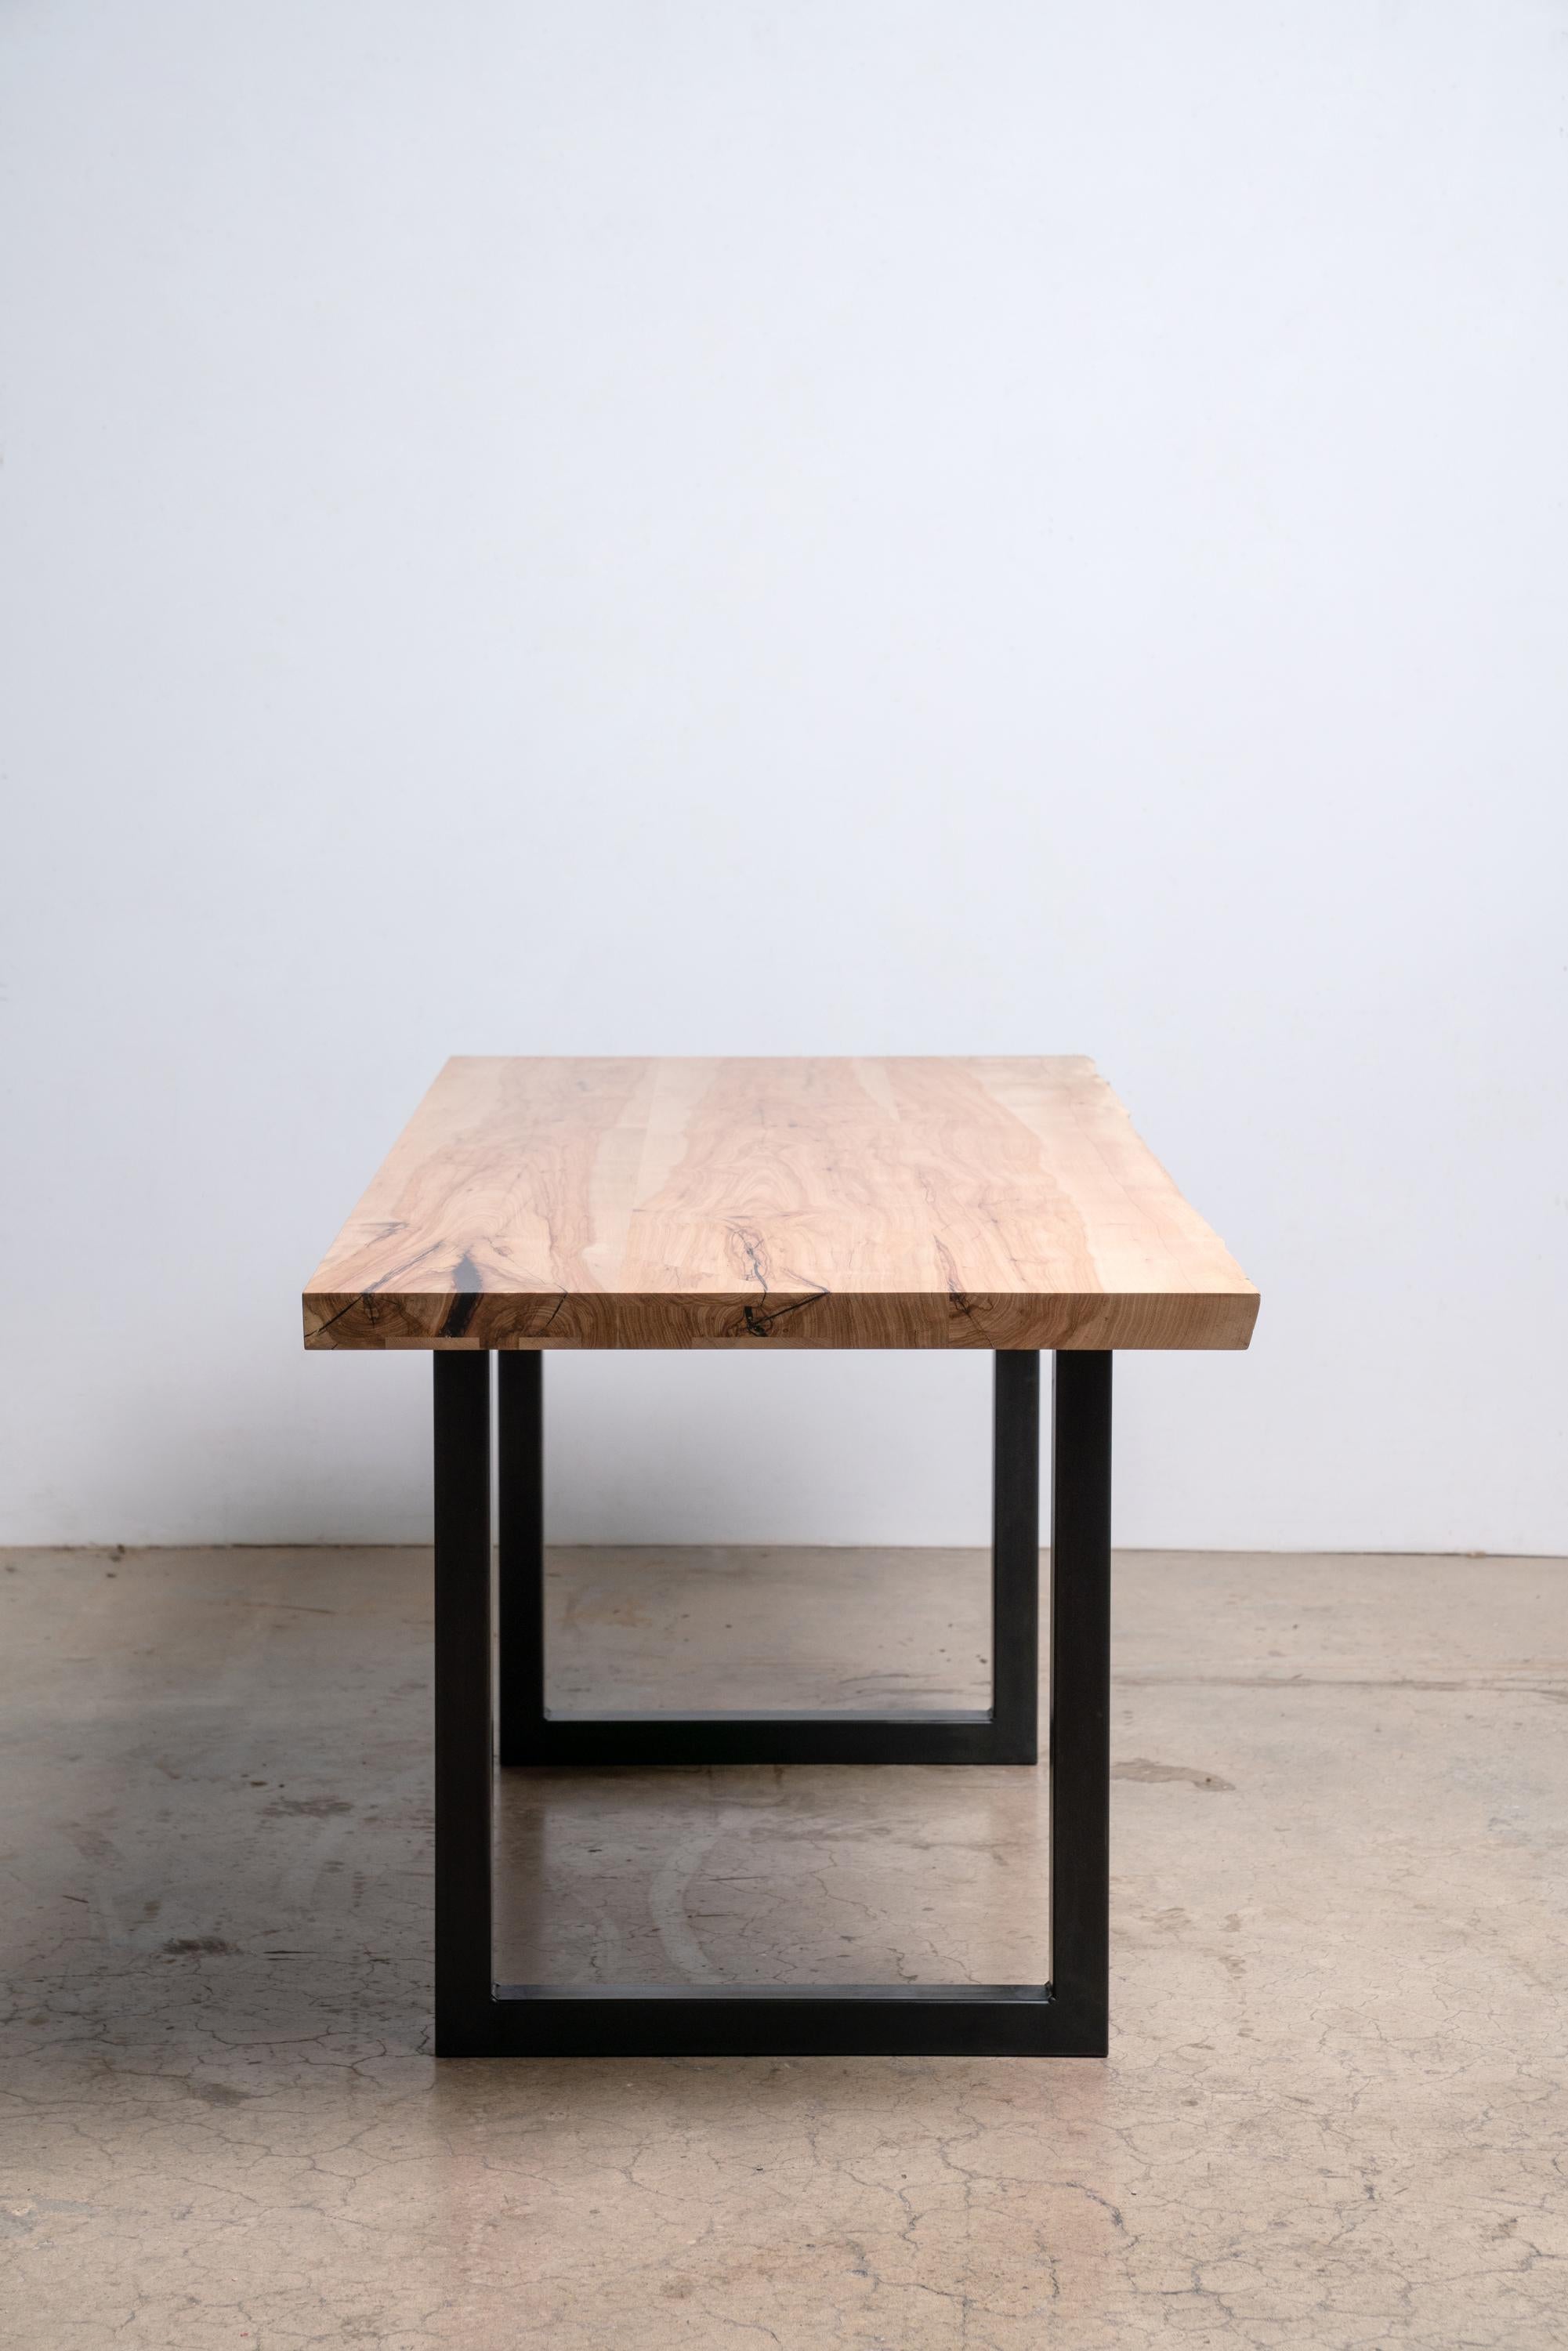 We call our live edge pecan table clear finish on Modern black steel square base a 